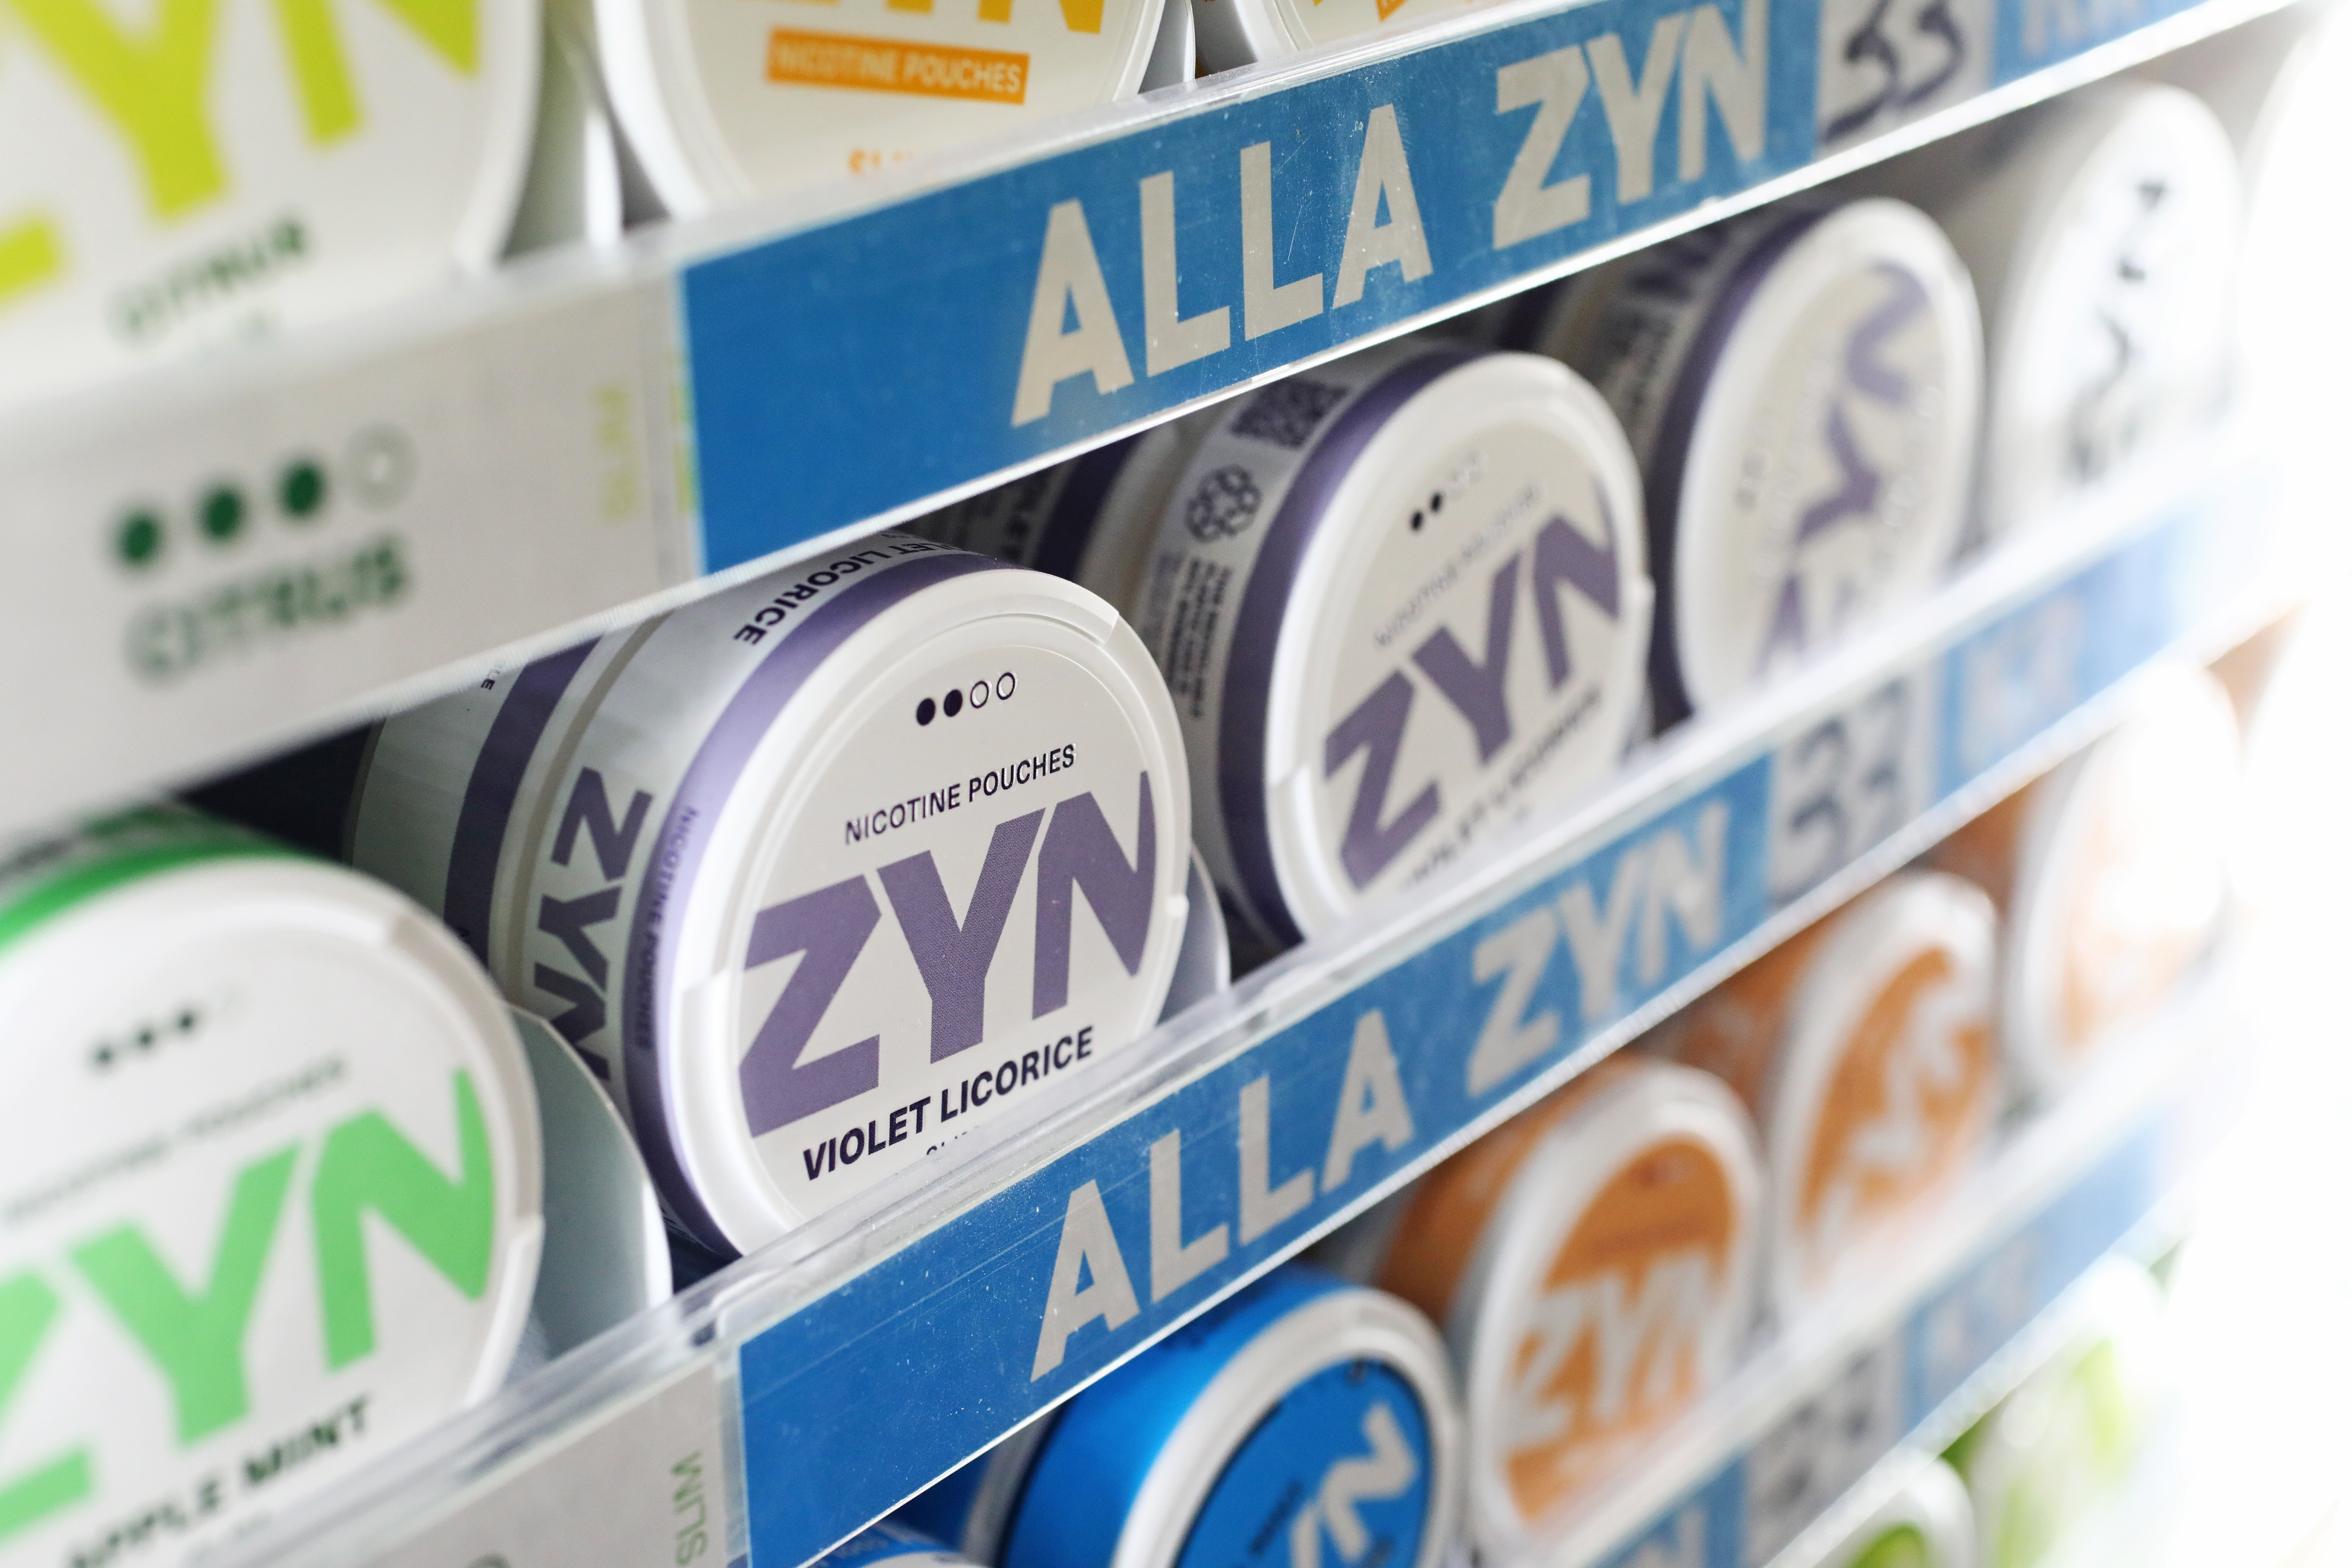 Chuck Schumer calls for crackdown on Zyn nicotine pouches - Washington Times